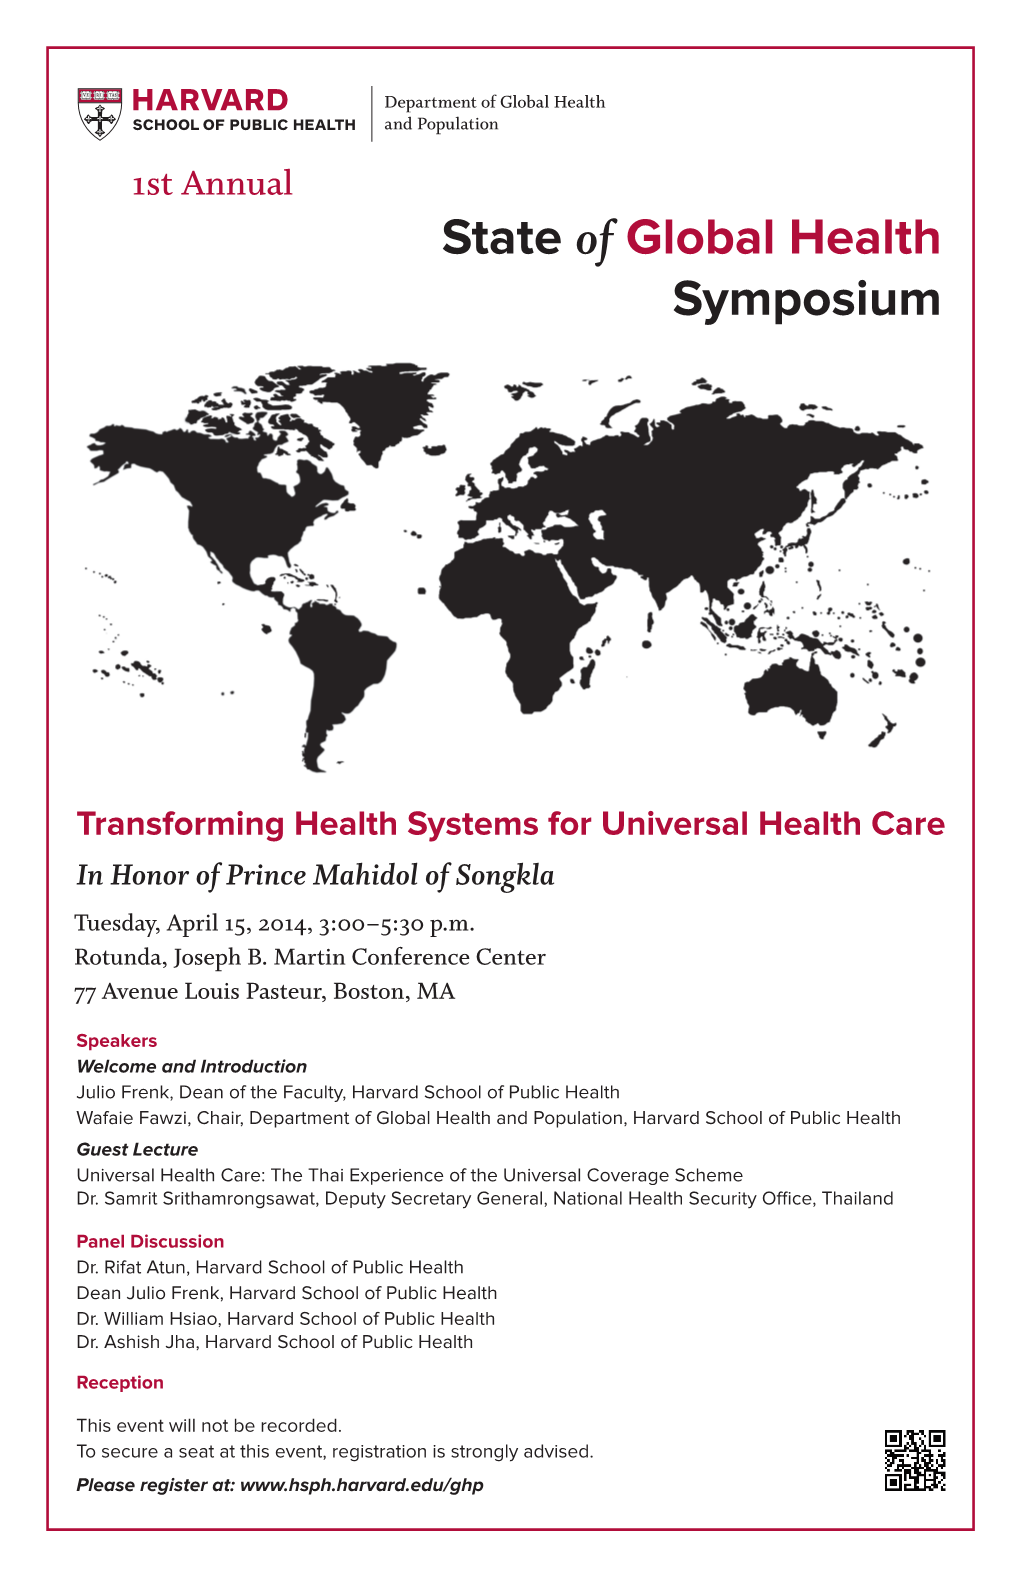 State of Global Health Symposium